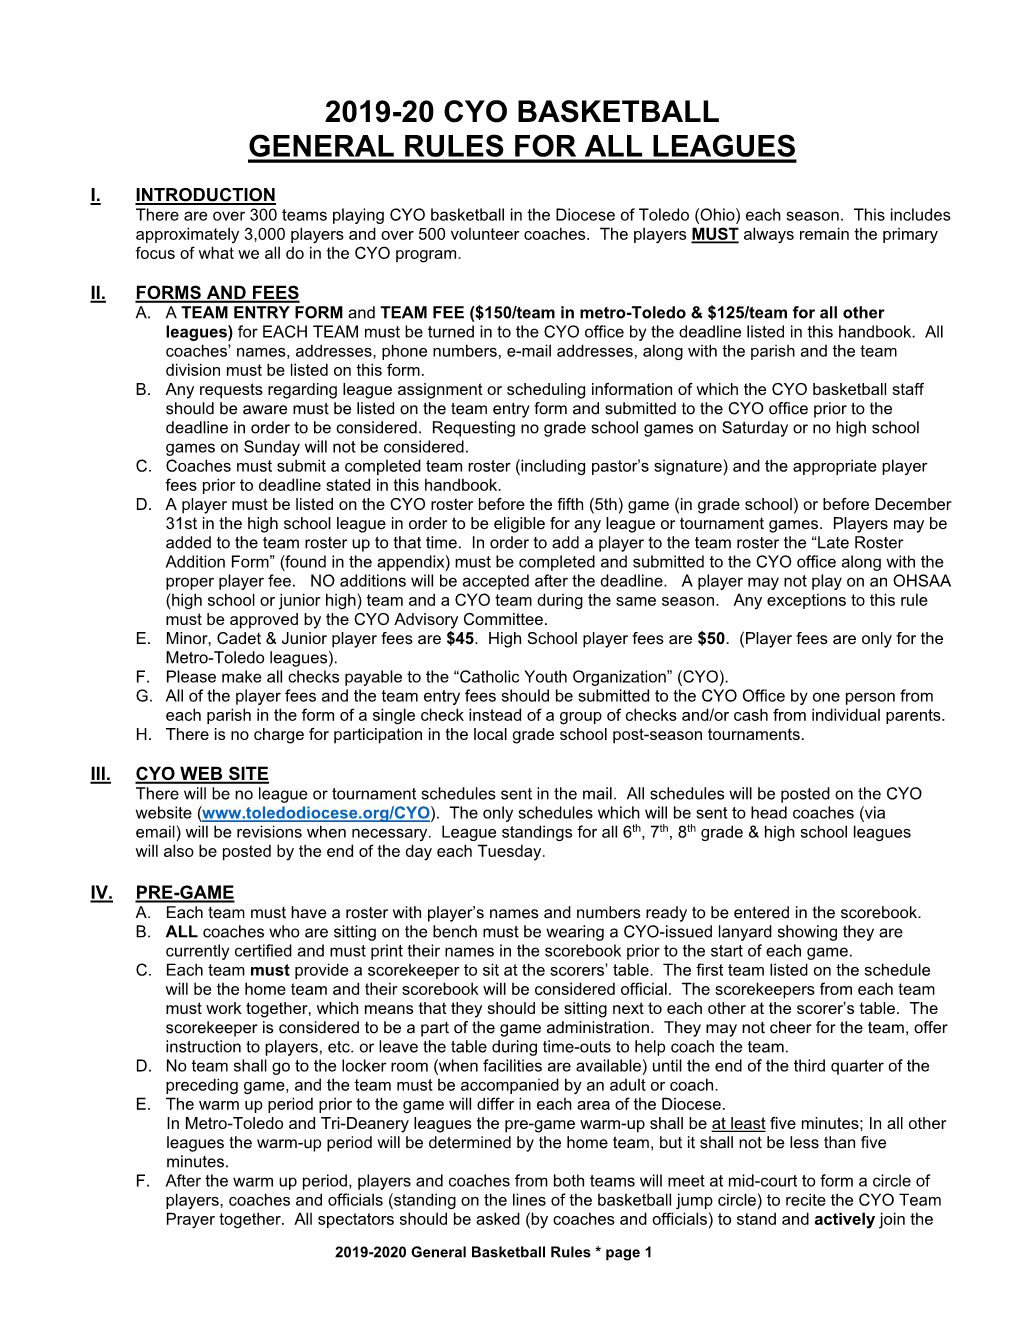 2019-20 Cyo Basketball General Rules for All Leagues